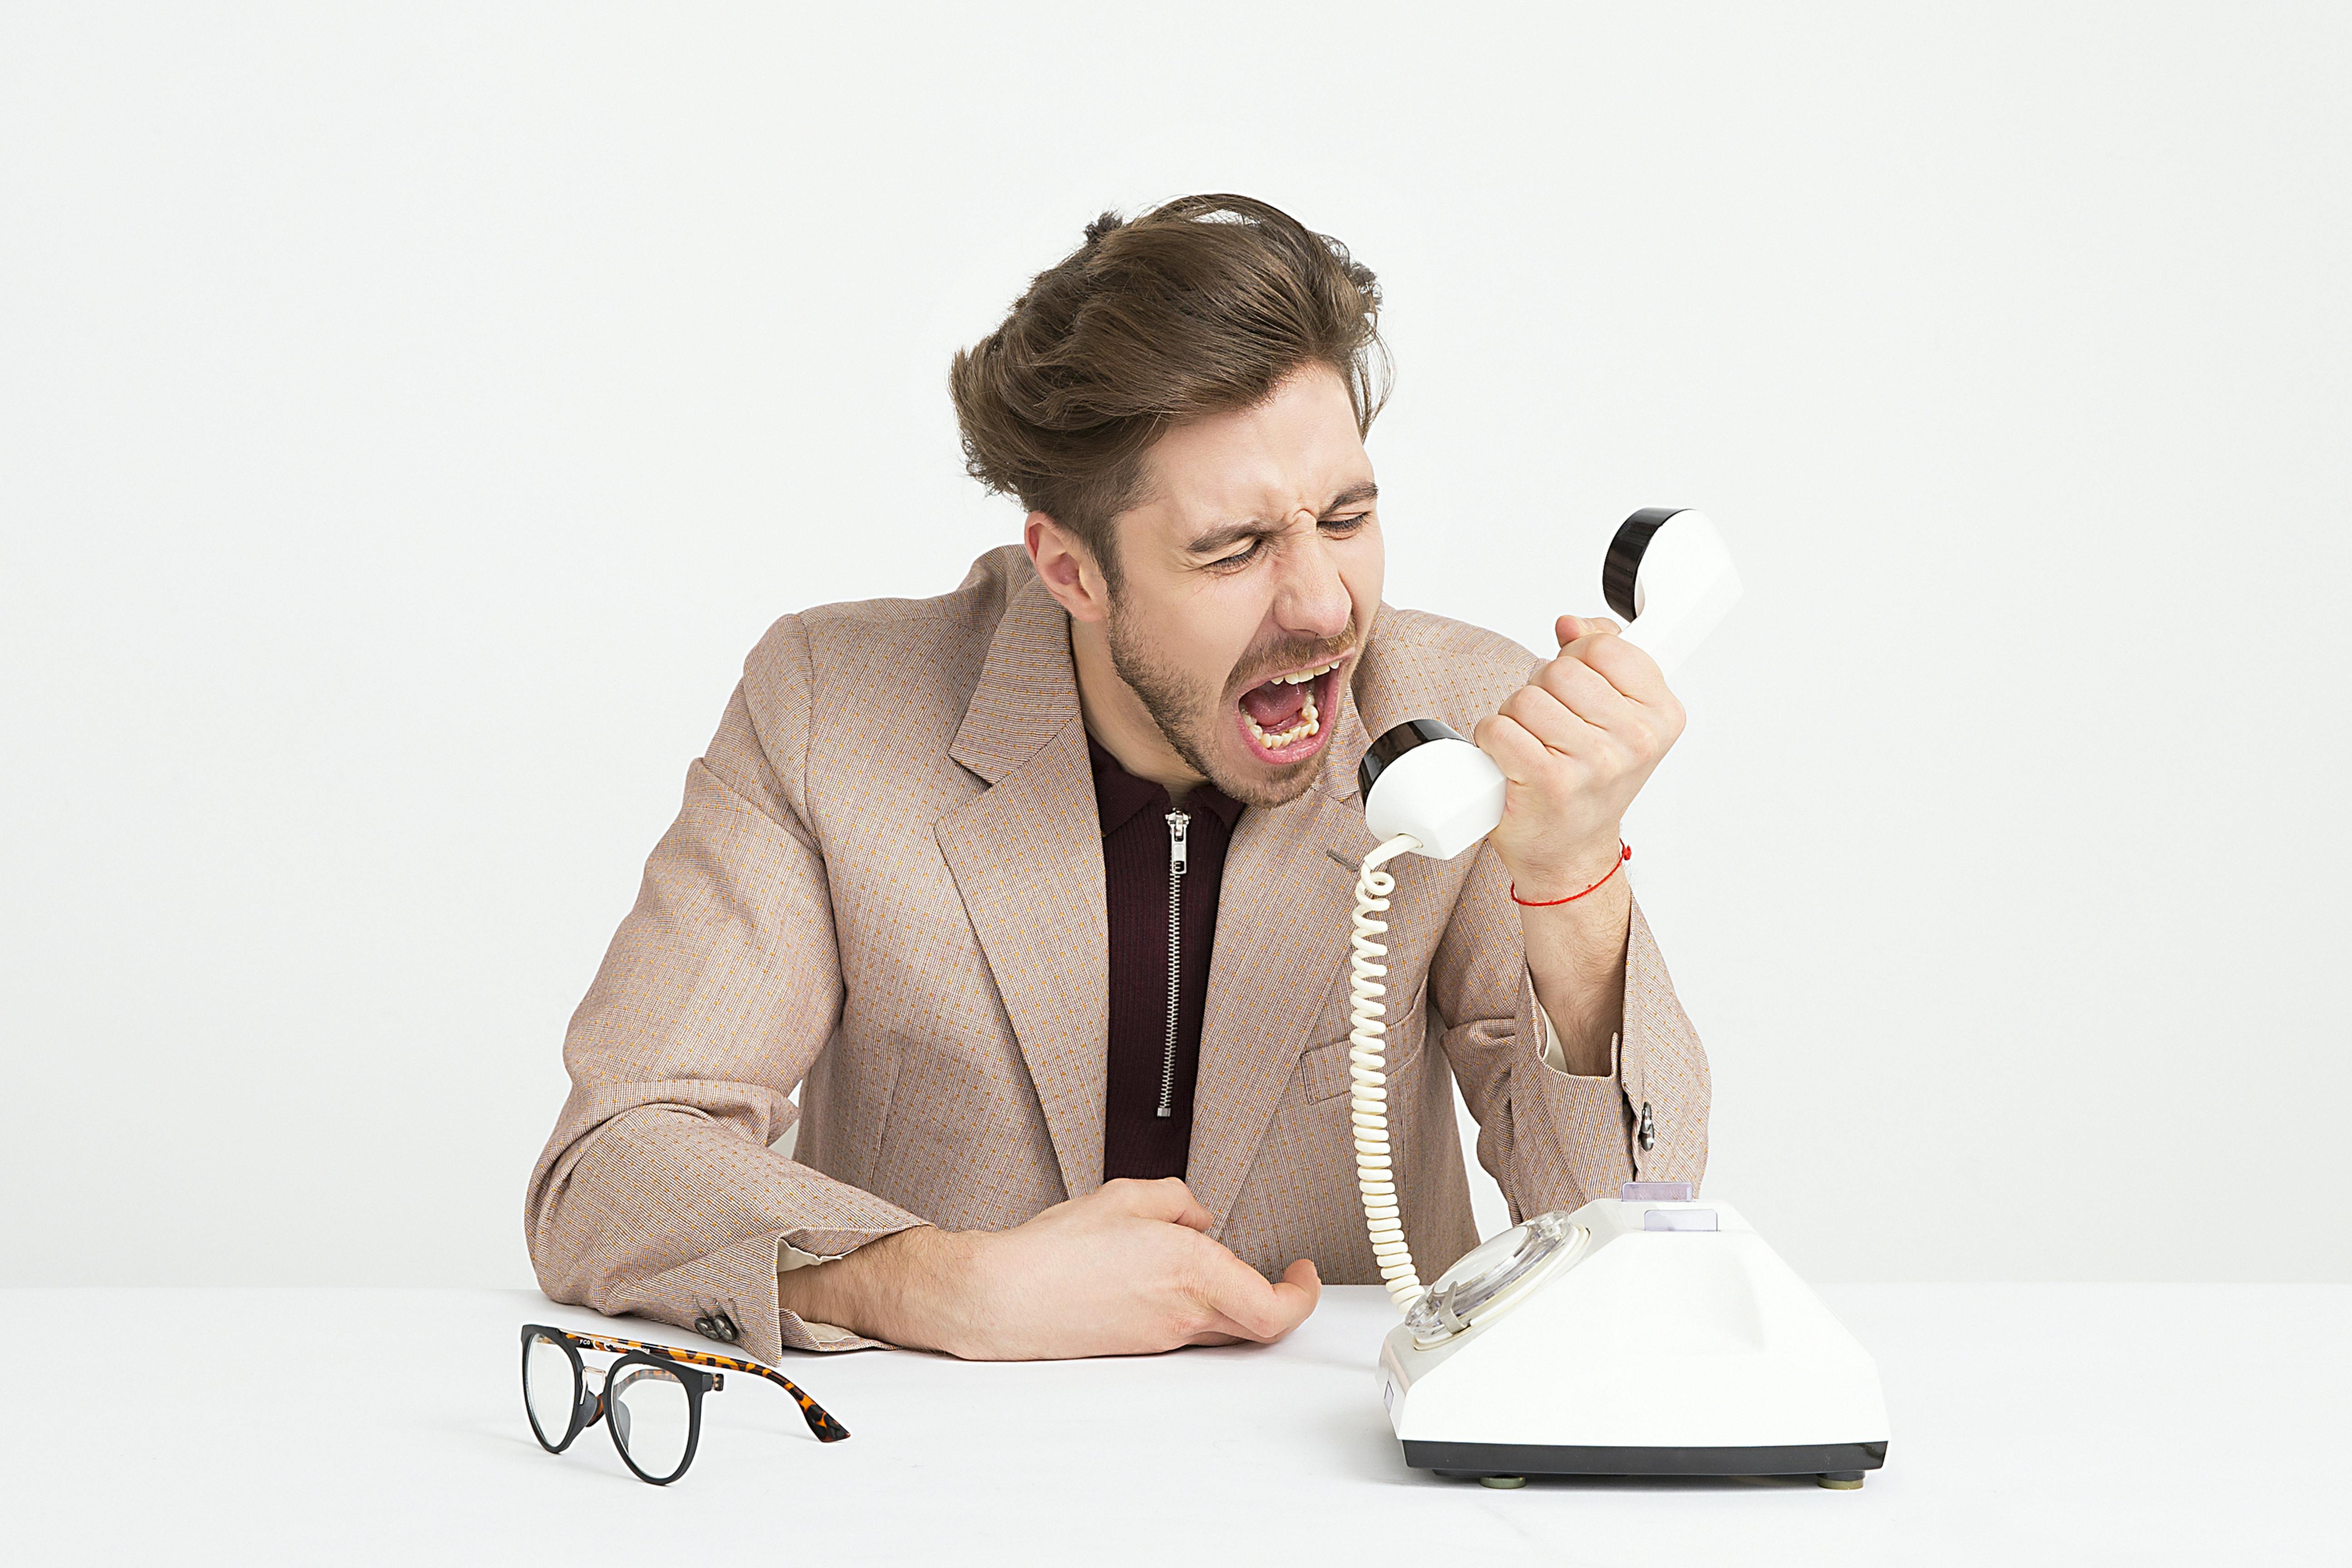 An angry man yelling into a phone | Source: Pexels